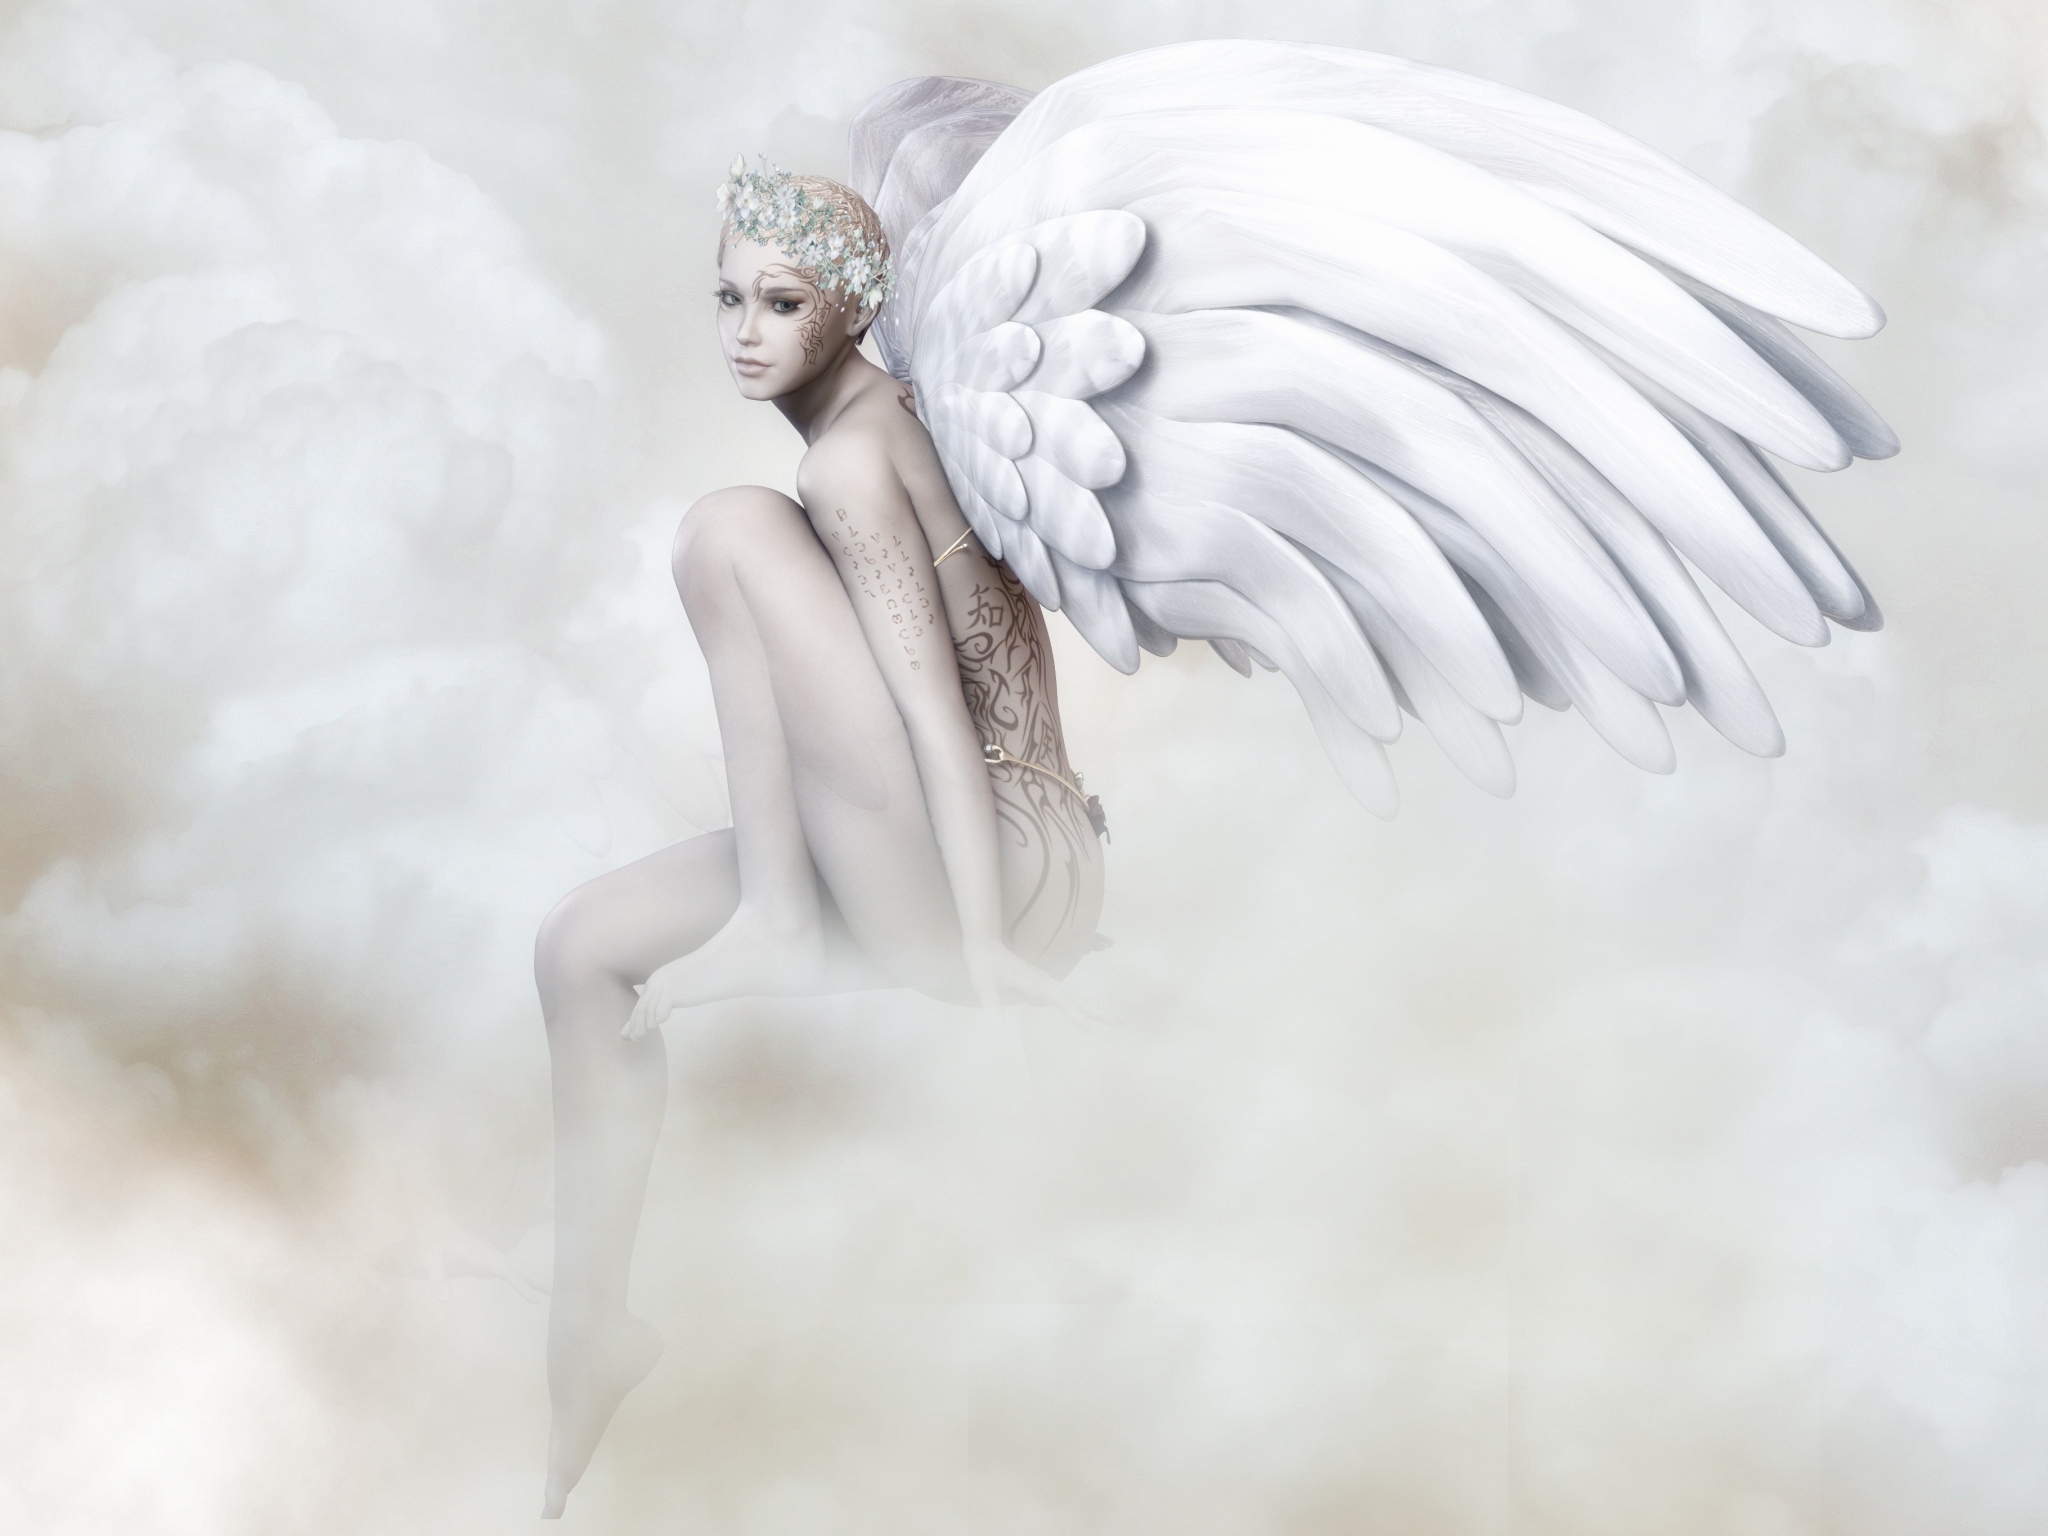 Angel Wallpaper Android - Guardian Angel Wallpaper For Android , HD Wallpaper & Backgrounds